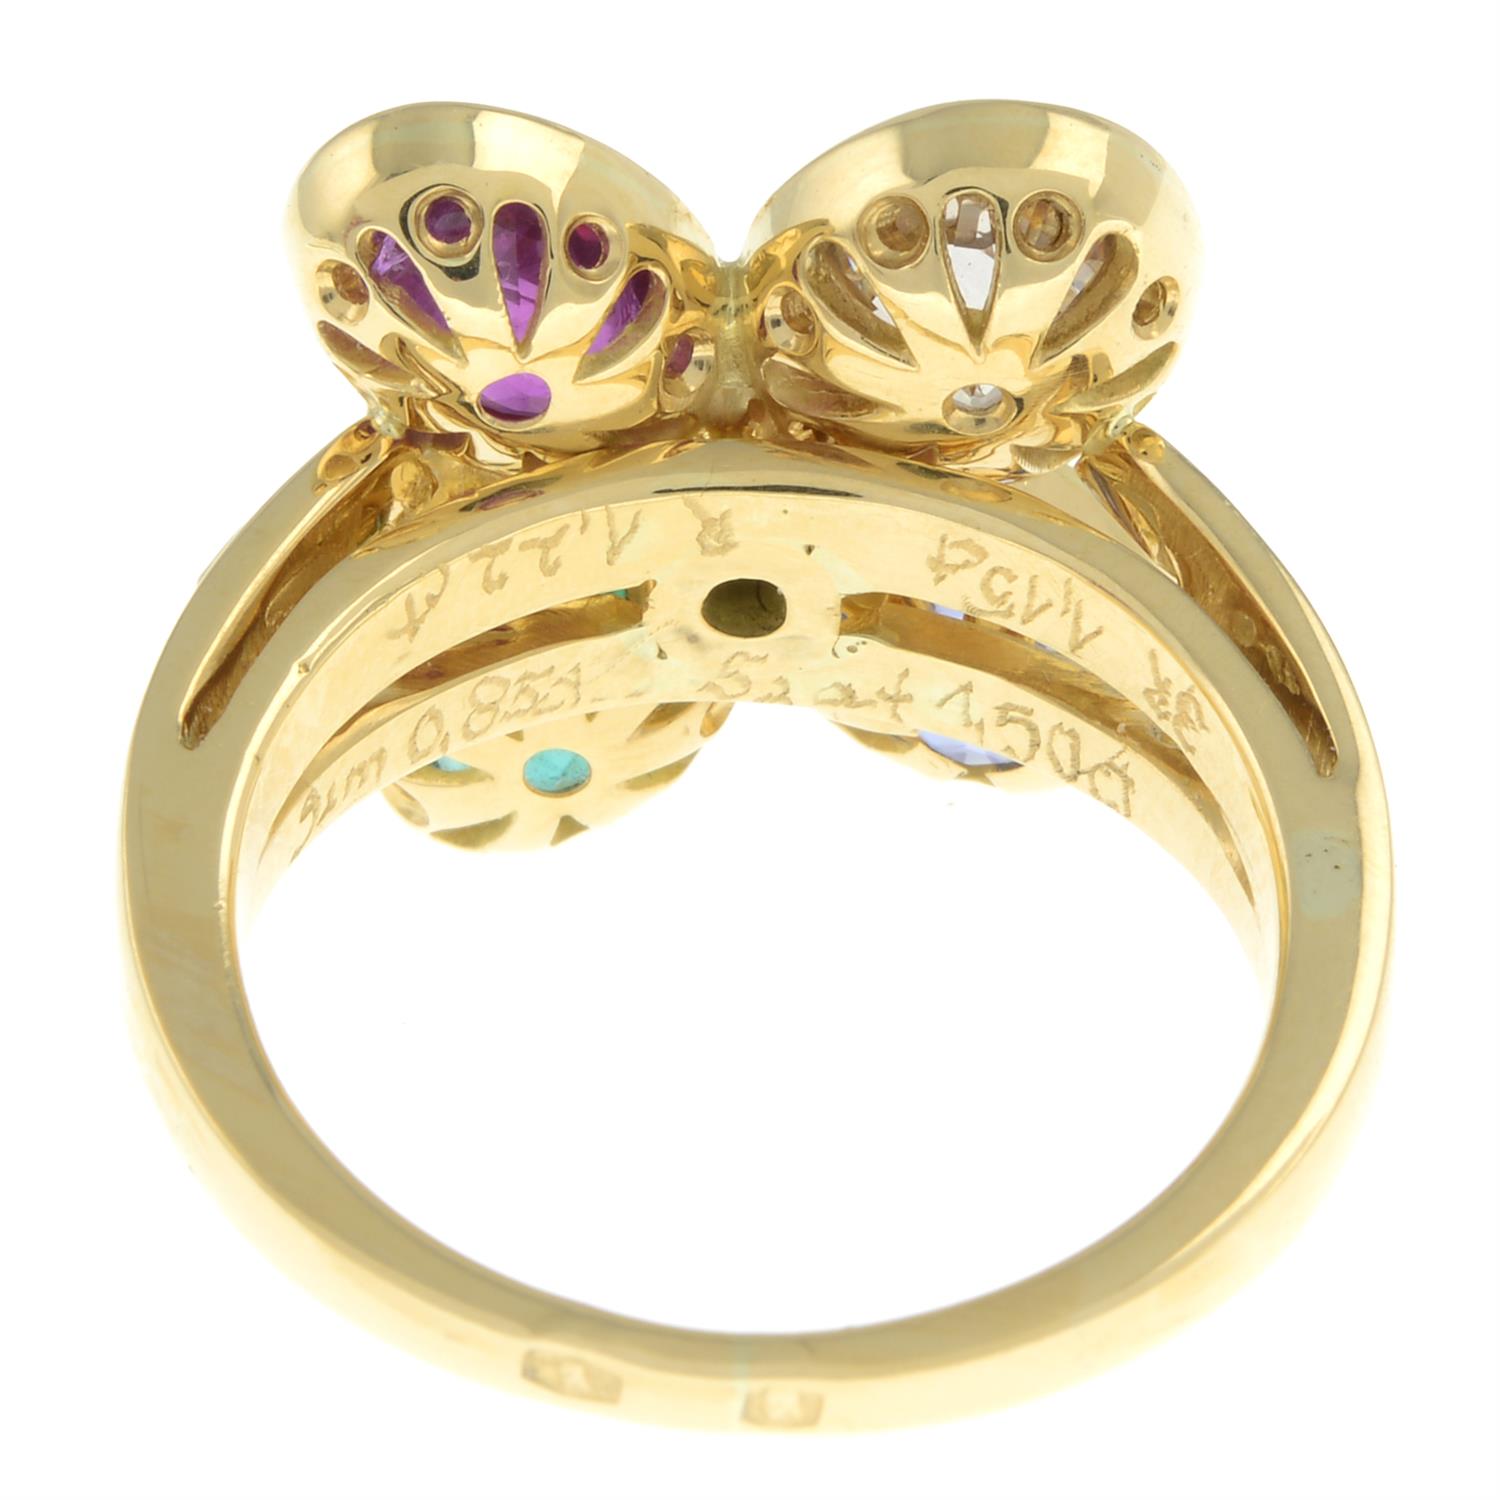 Diamond and gem four-leaf clover ring - Image 3 of 5